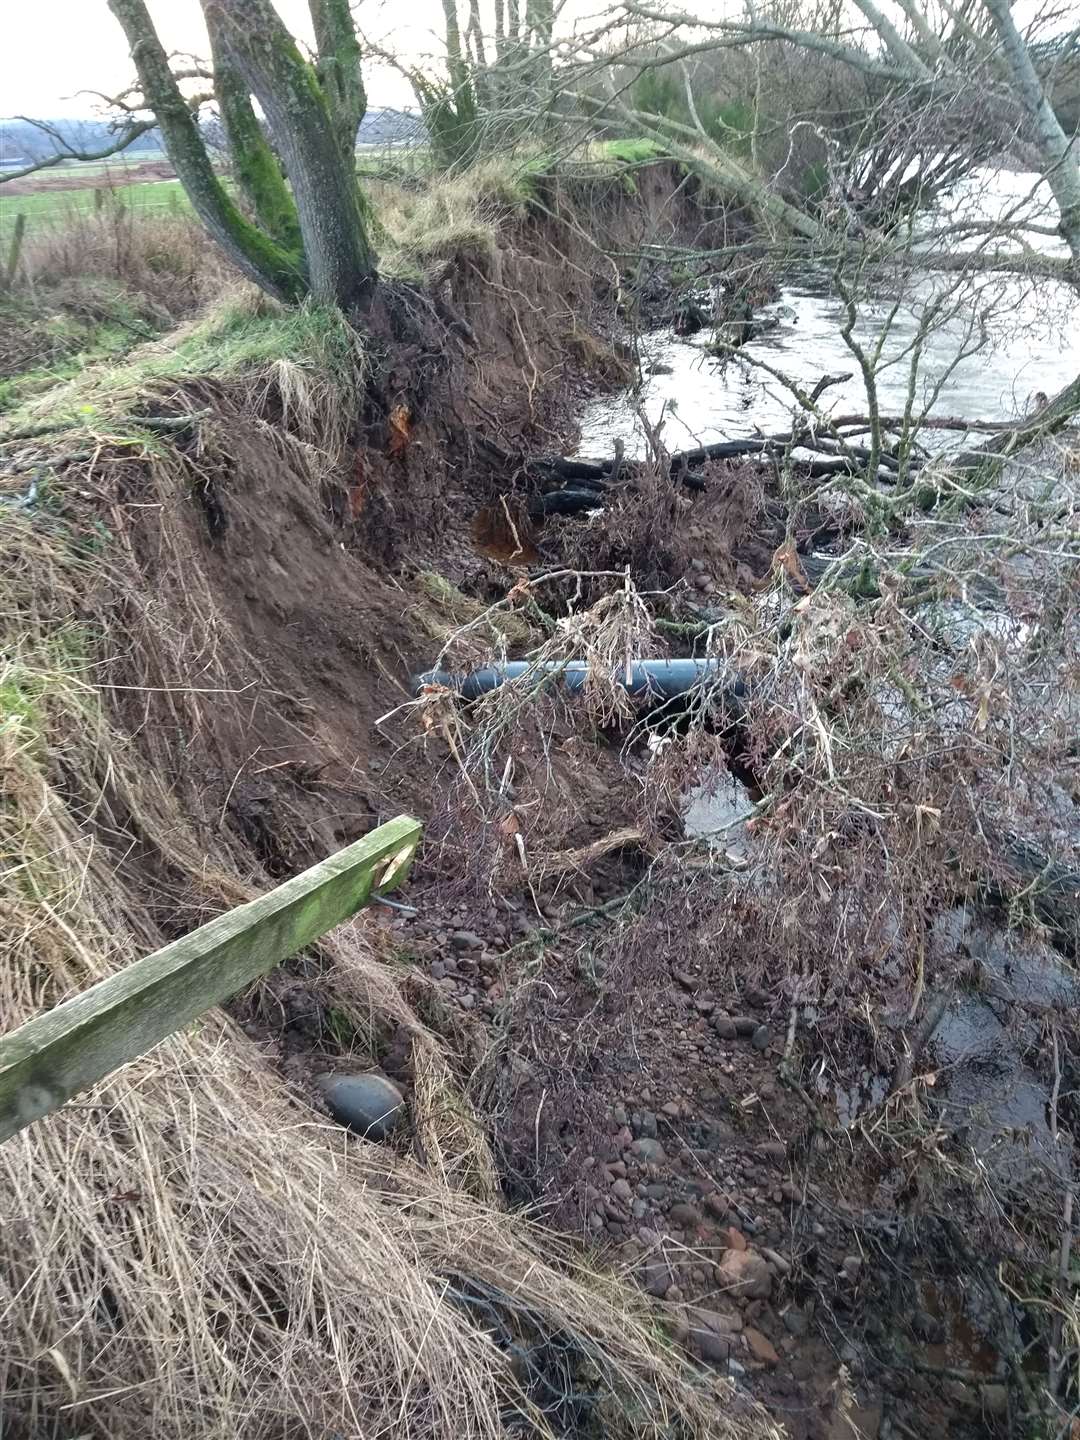 Part of the embankment has collapsed.